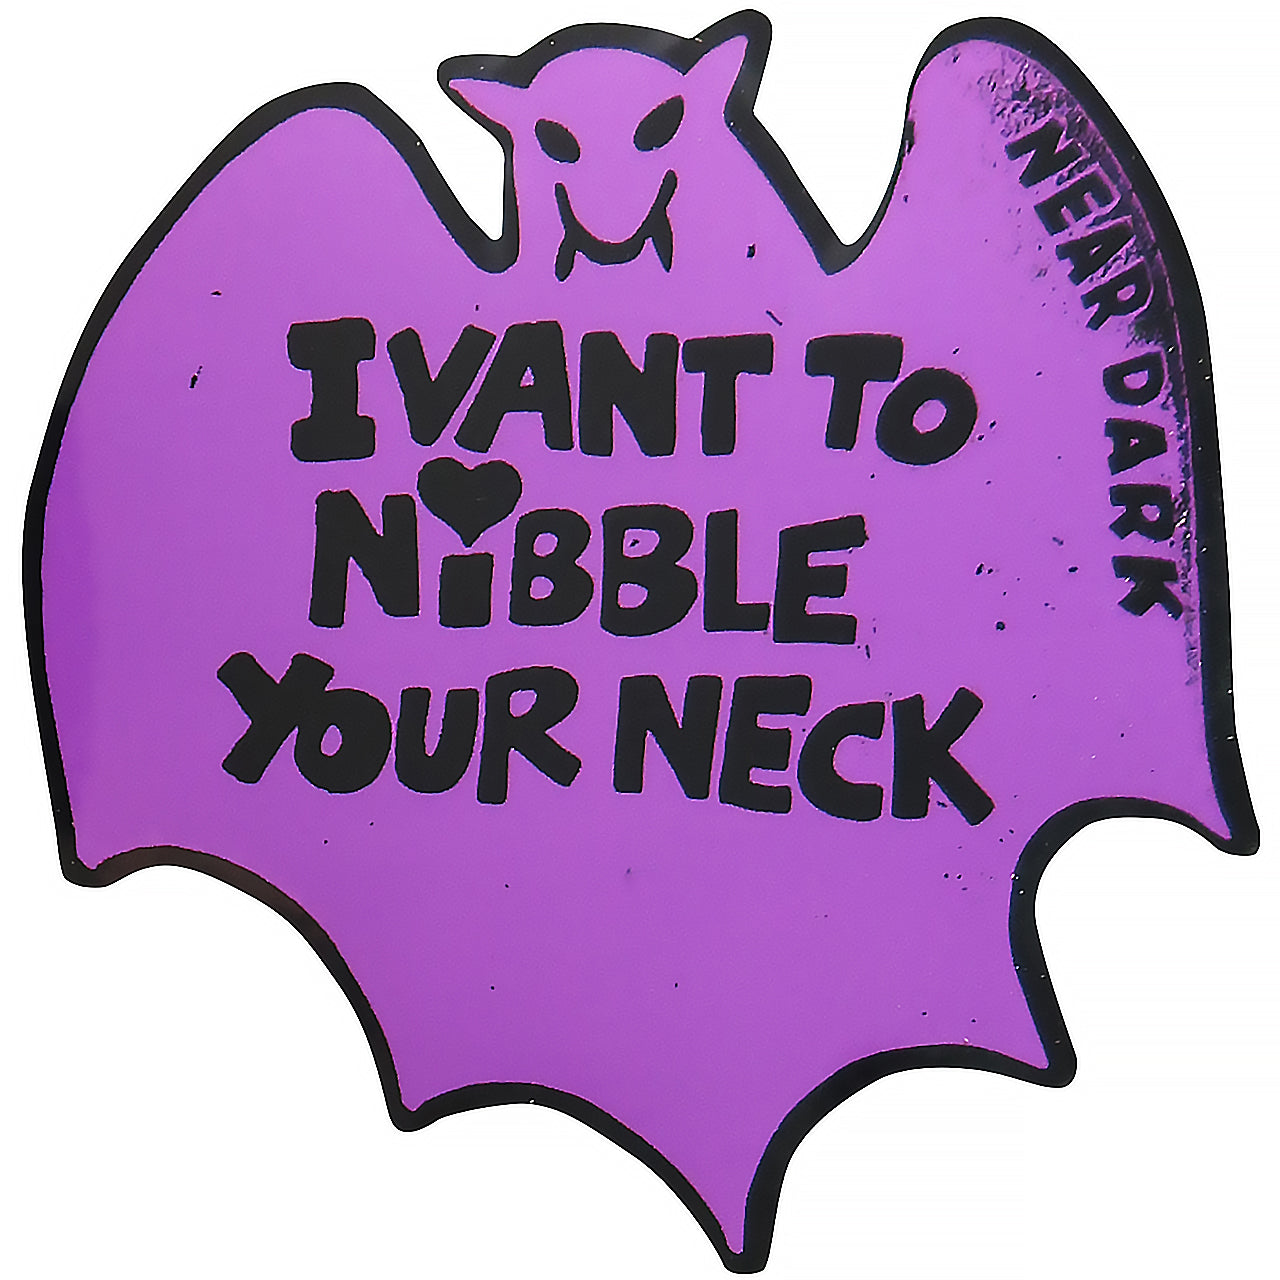 Nibble Your Neck - 3.5" sticker